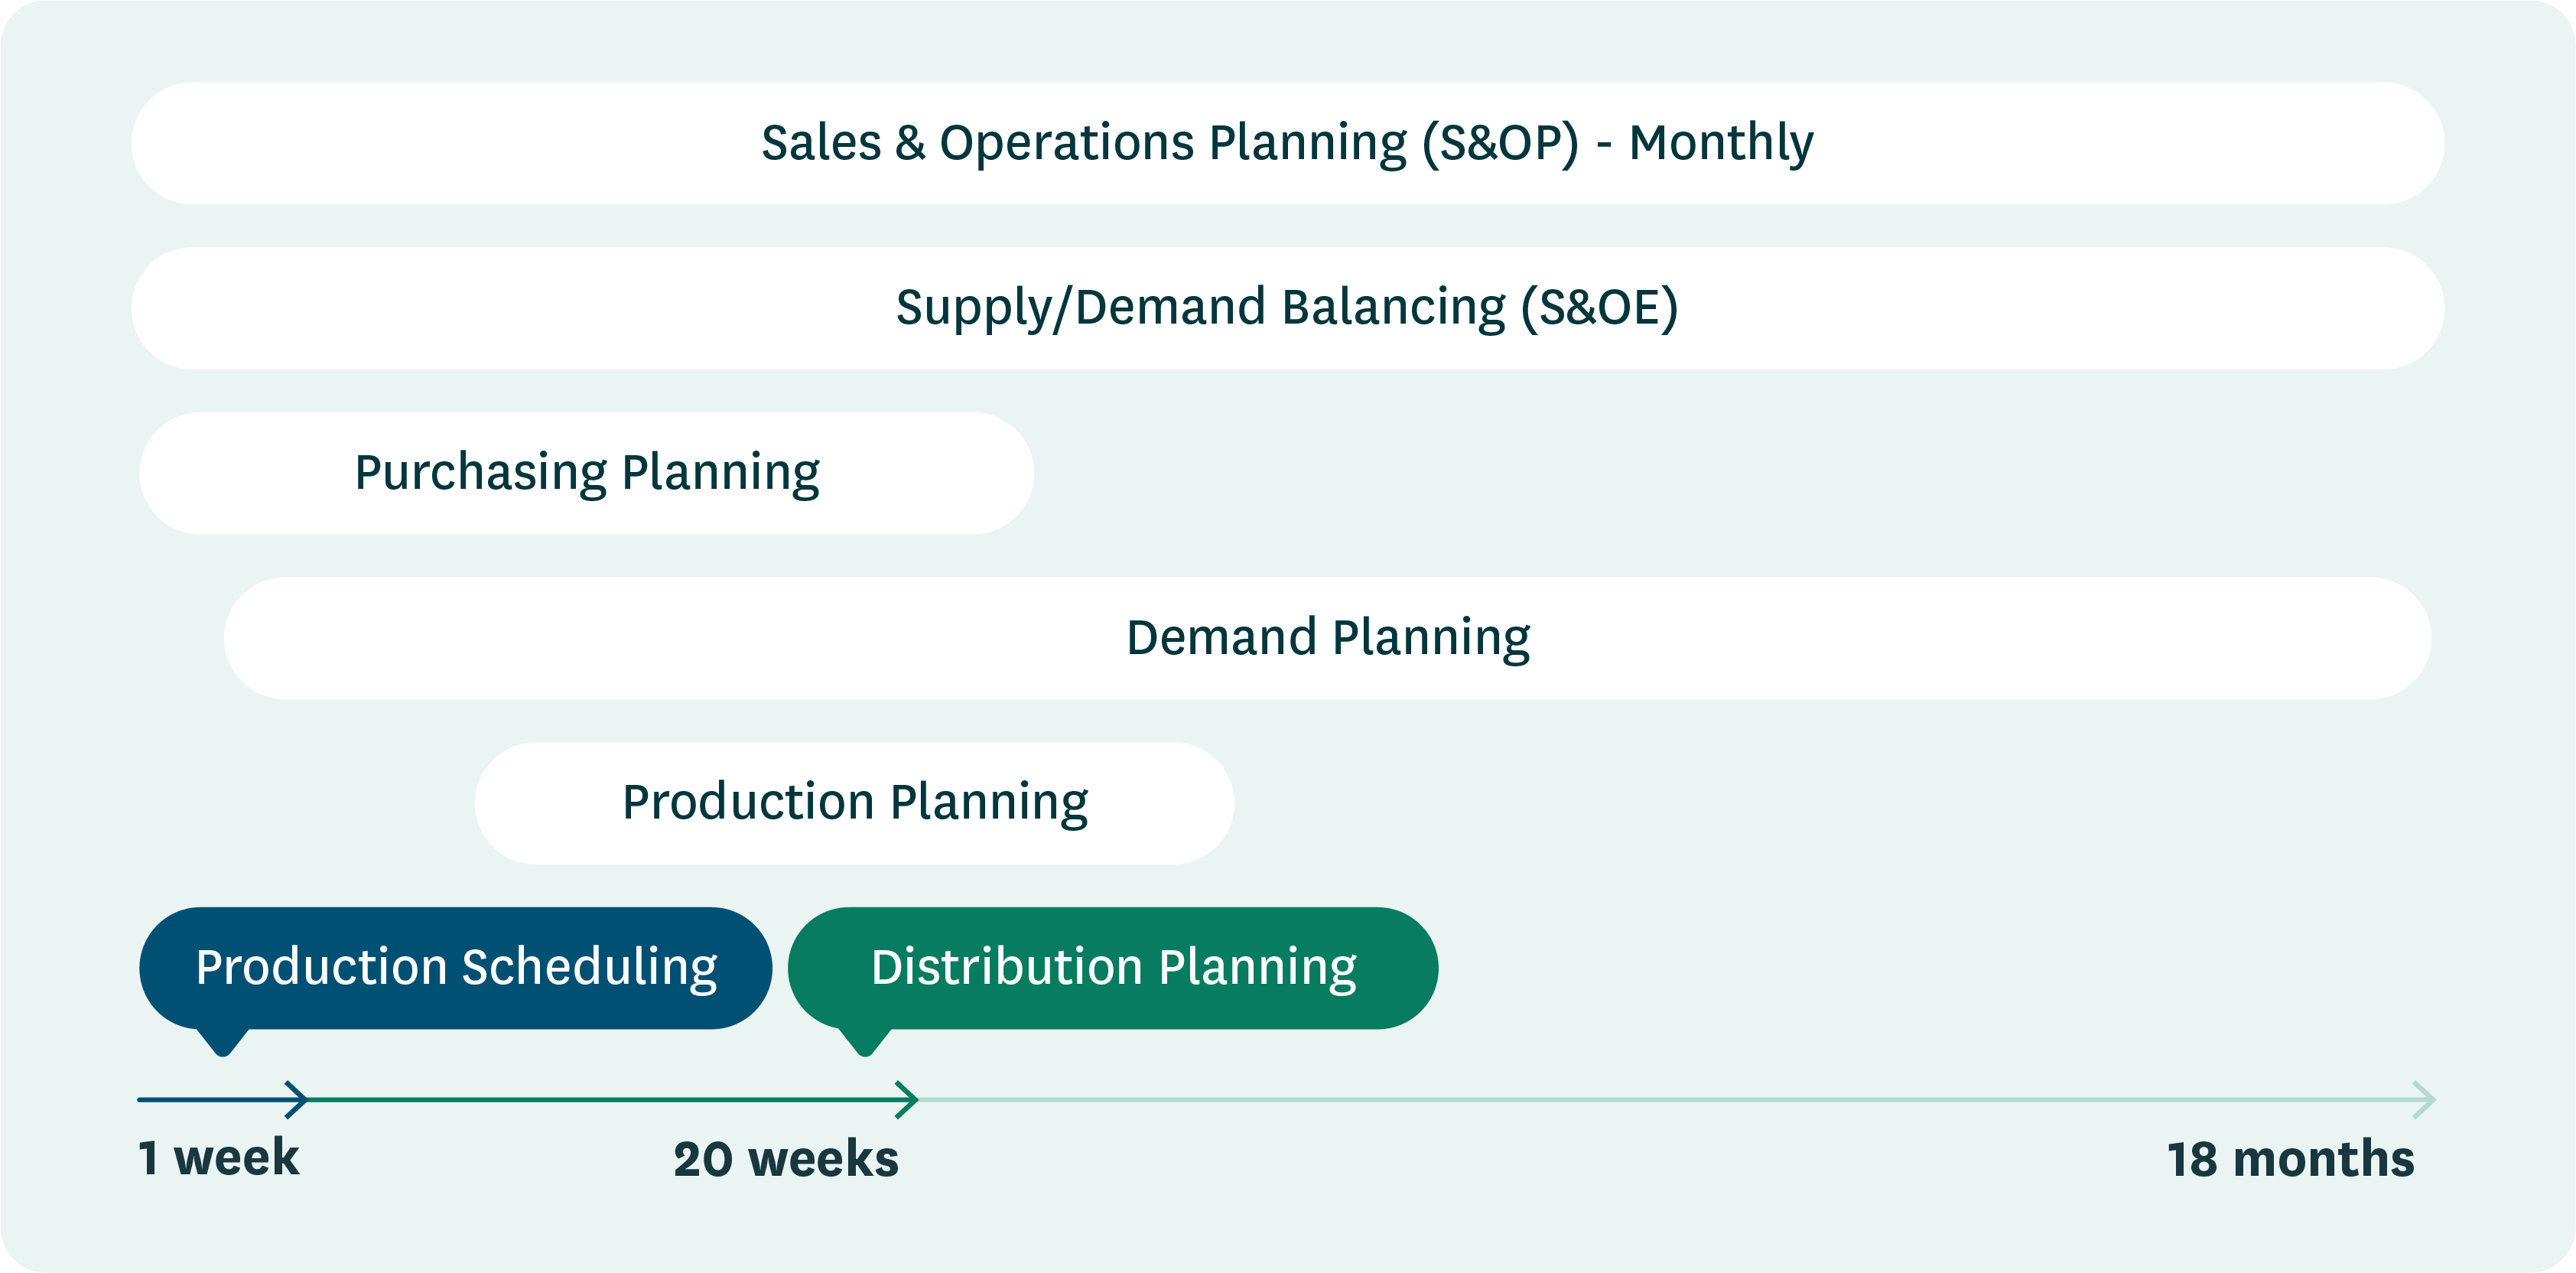 A Gantt chart outlining the timelines for various planning functions, like production scheduling, purchasing planning, and S&OP. The timelines for these functions overlap, showing the need for cross-functional planning and data sharing.